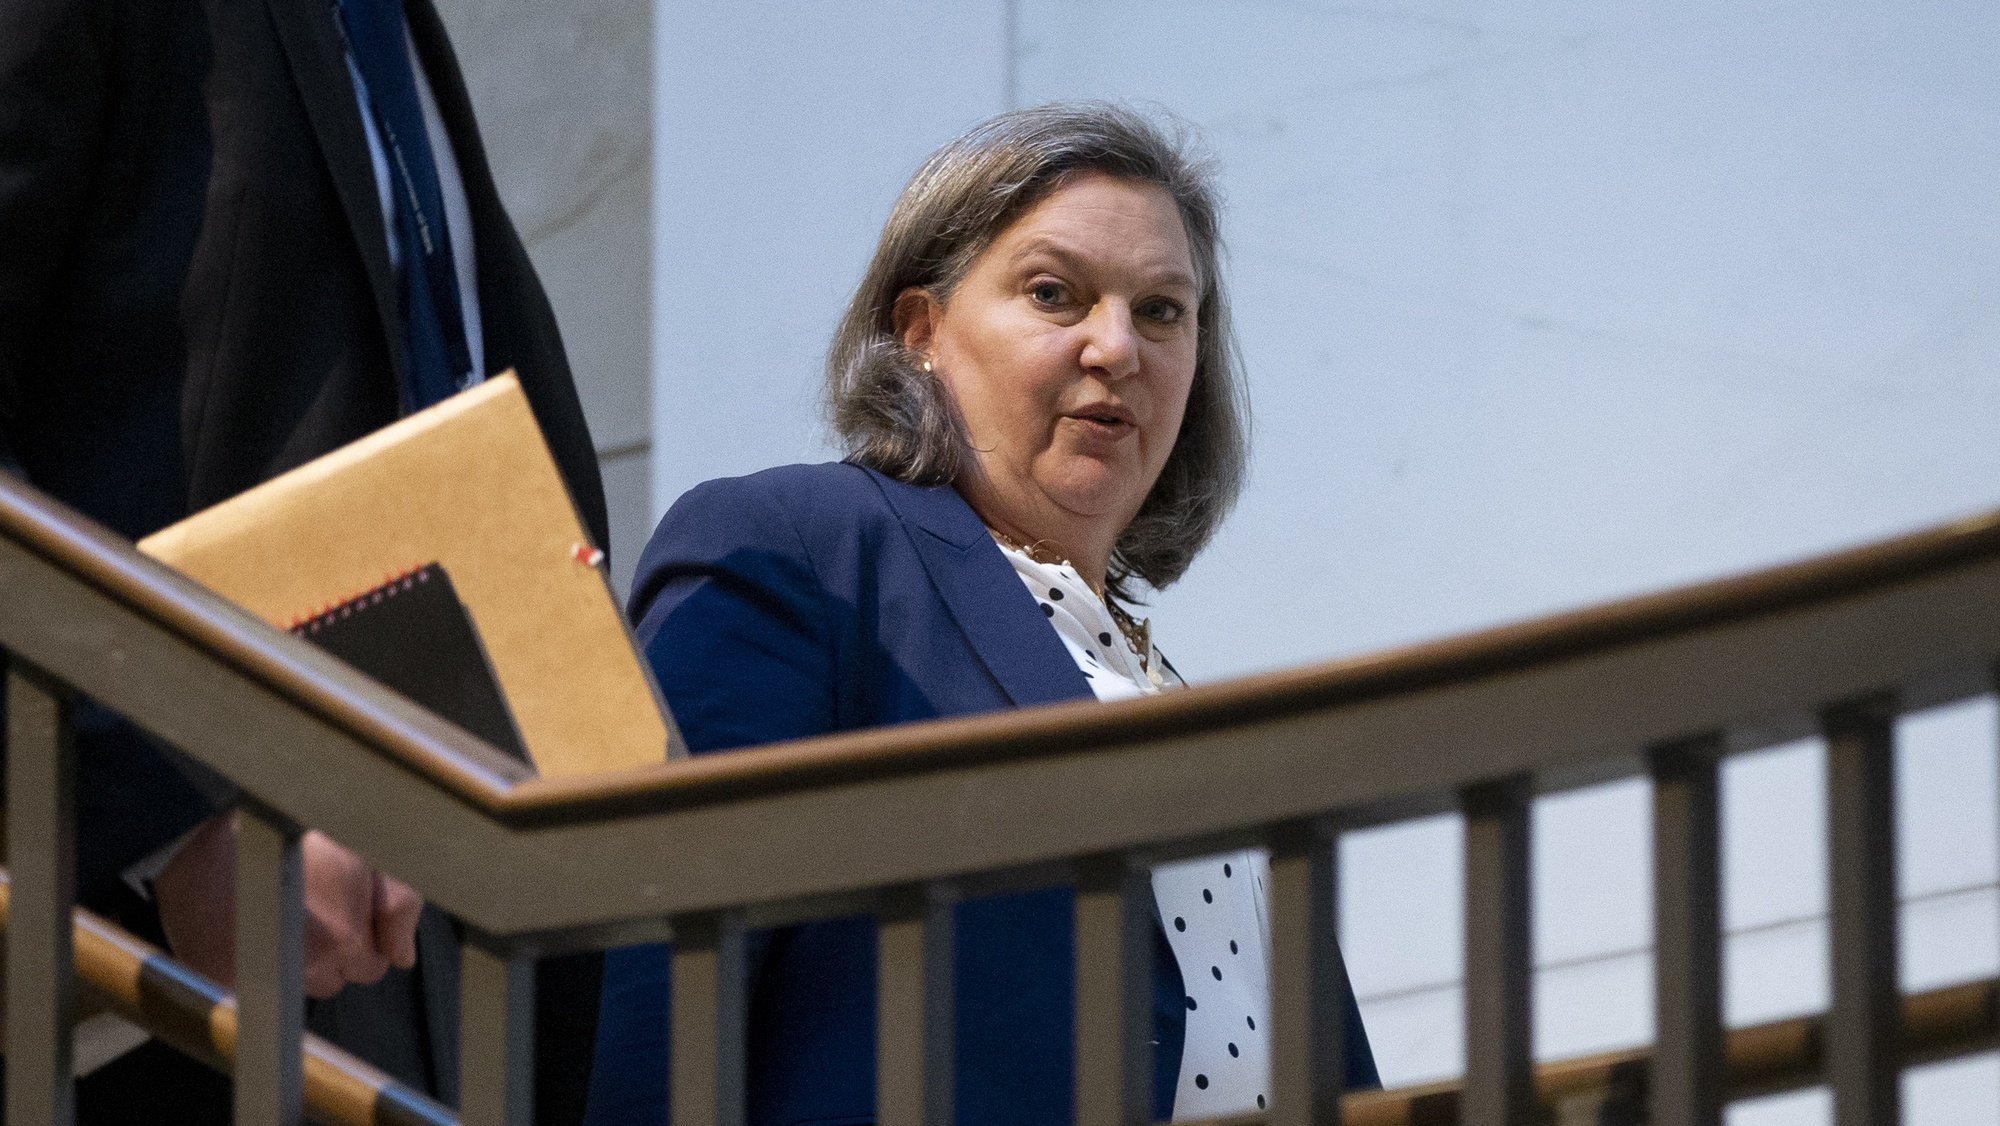 epa09808764 US Under Secretary of State for Political Affairs Victoria Nuland arrives to give a closed briefing to Senate Foreign Relations Committee members on the Russian invasion of Ukraine, on Capitol Hill in Washington, DC, USA, 07 March 2022.  EPA/MICHAEL REYNOLDS